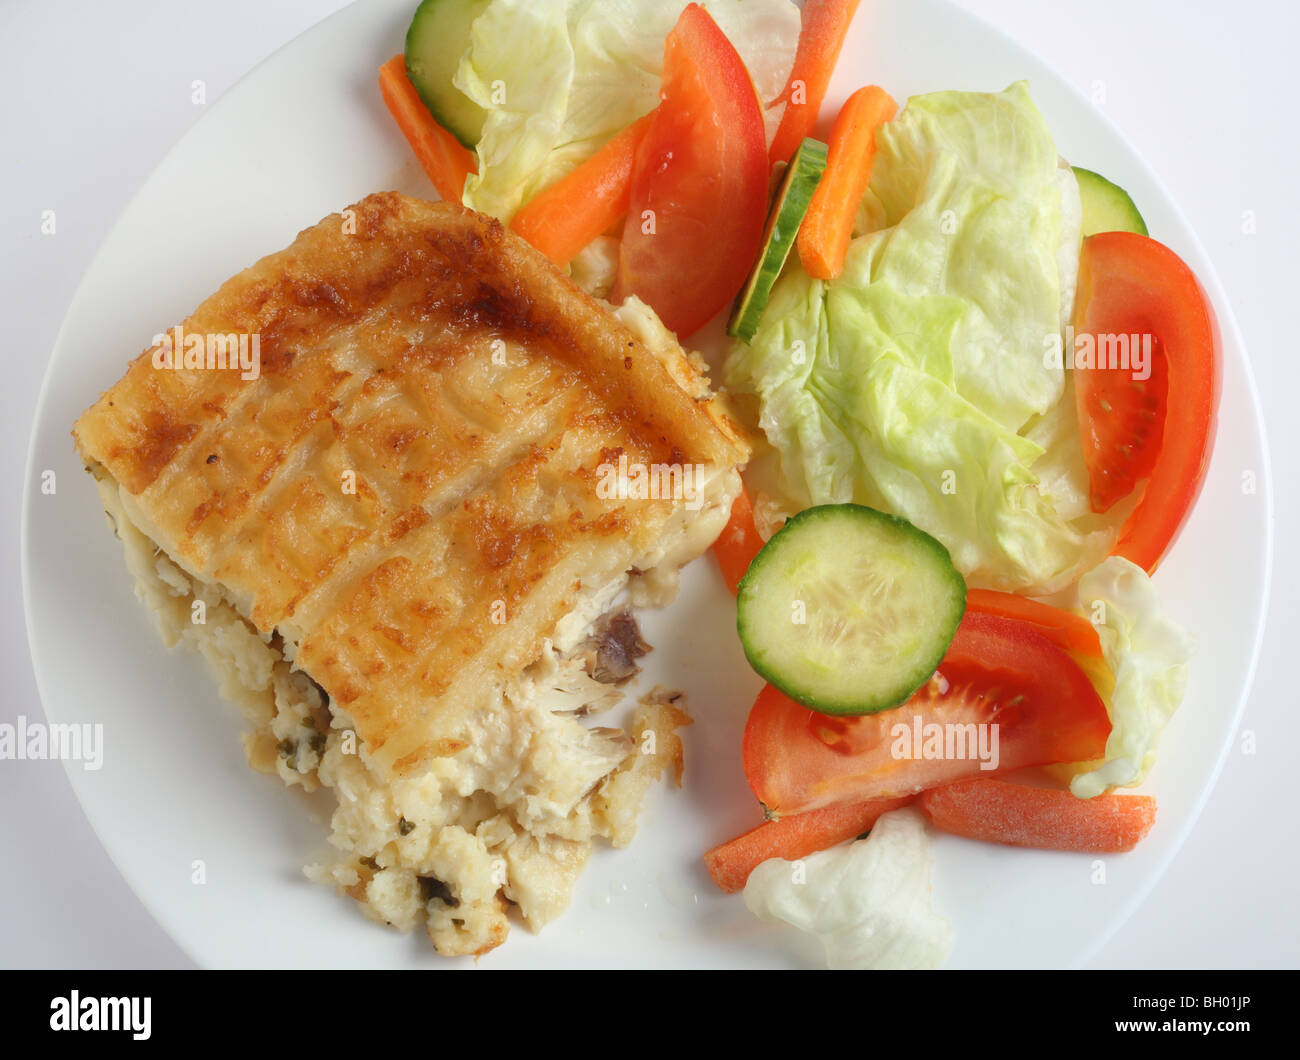 Traditional seafood pie, with fish in bechamel sauce topped with mashed potato and baked, served with a salad, high angle view Stock Photo